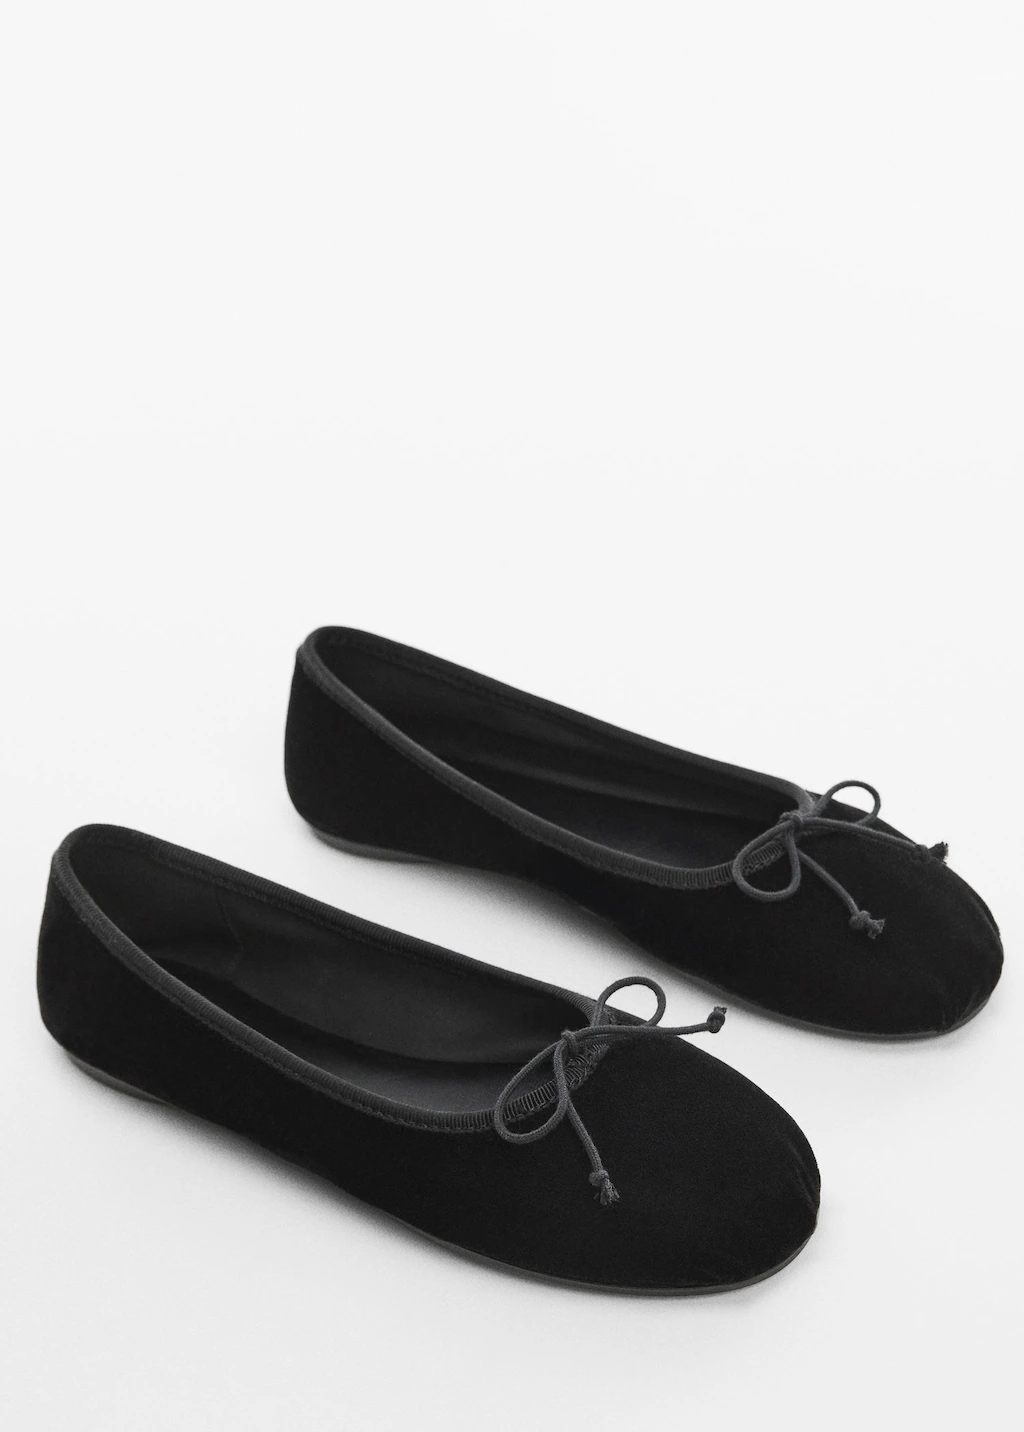 Mango velvet ballerina shoes in black with round toe and bow on the front. 